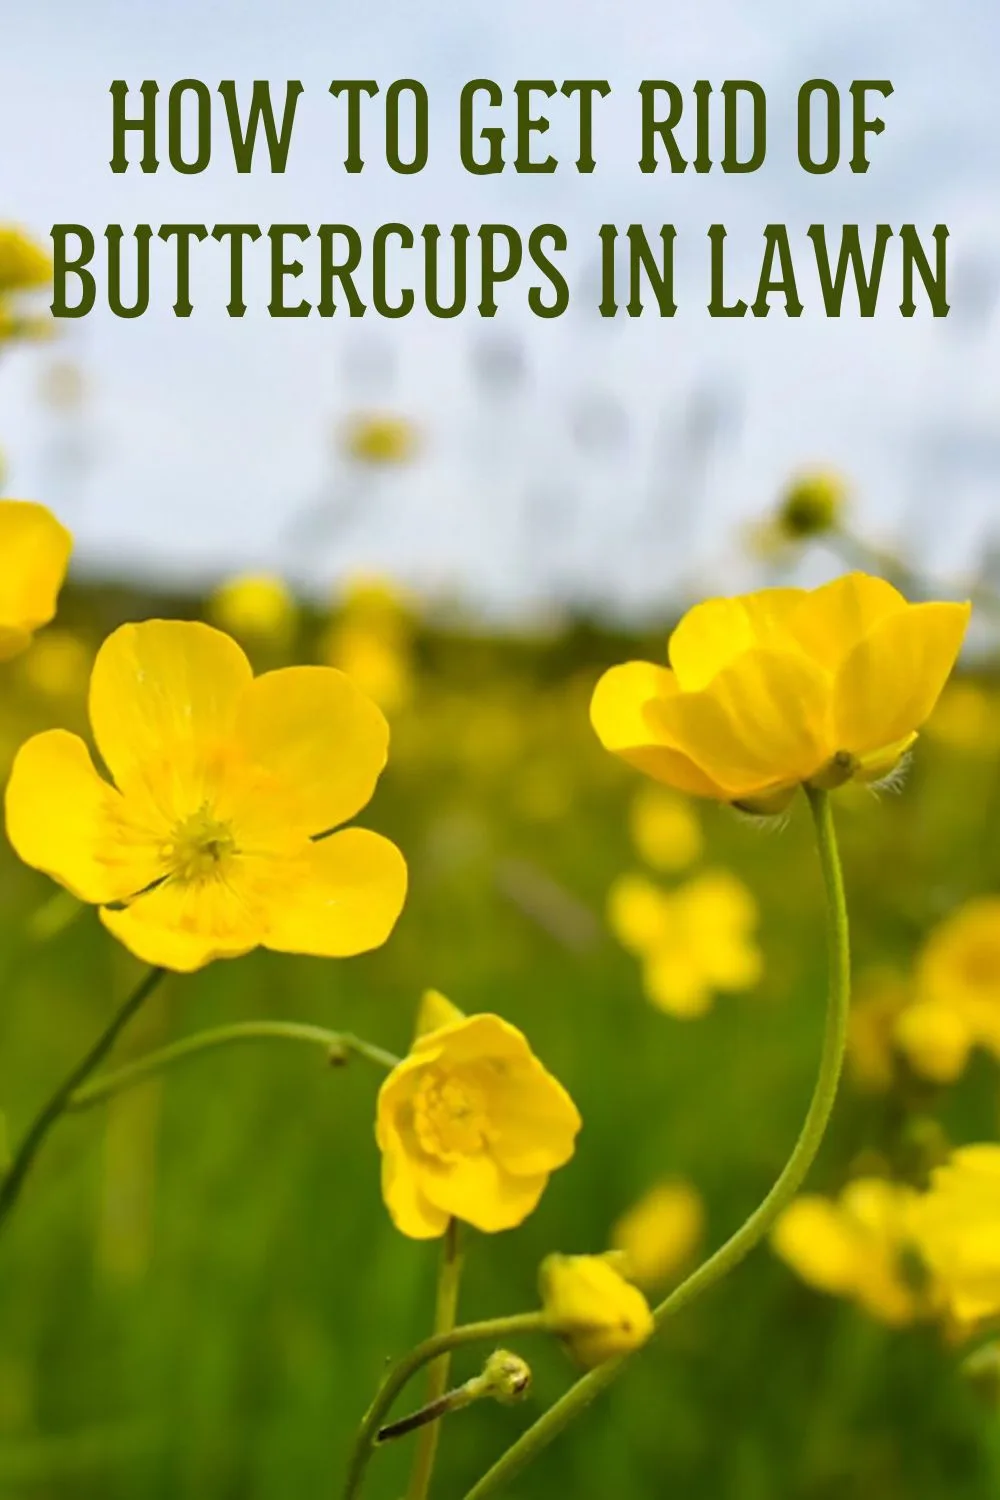 How to gt rid of buttercups in lawn.